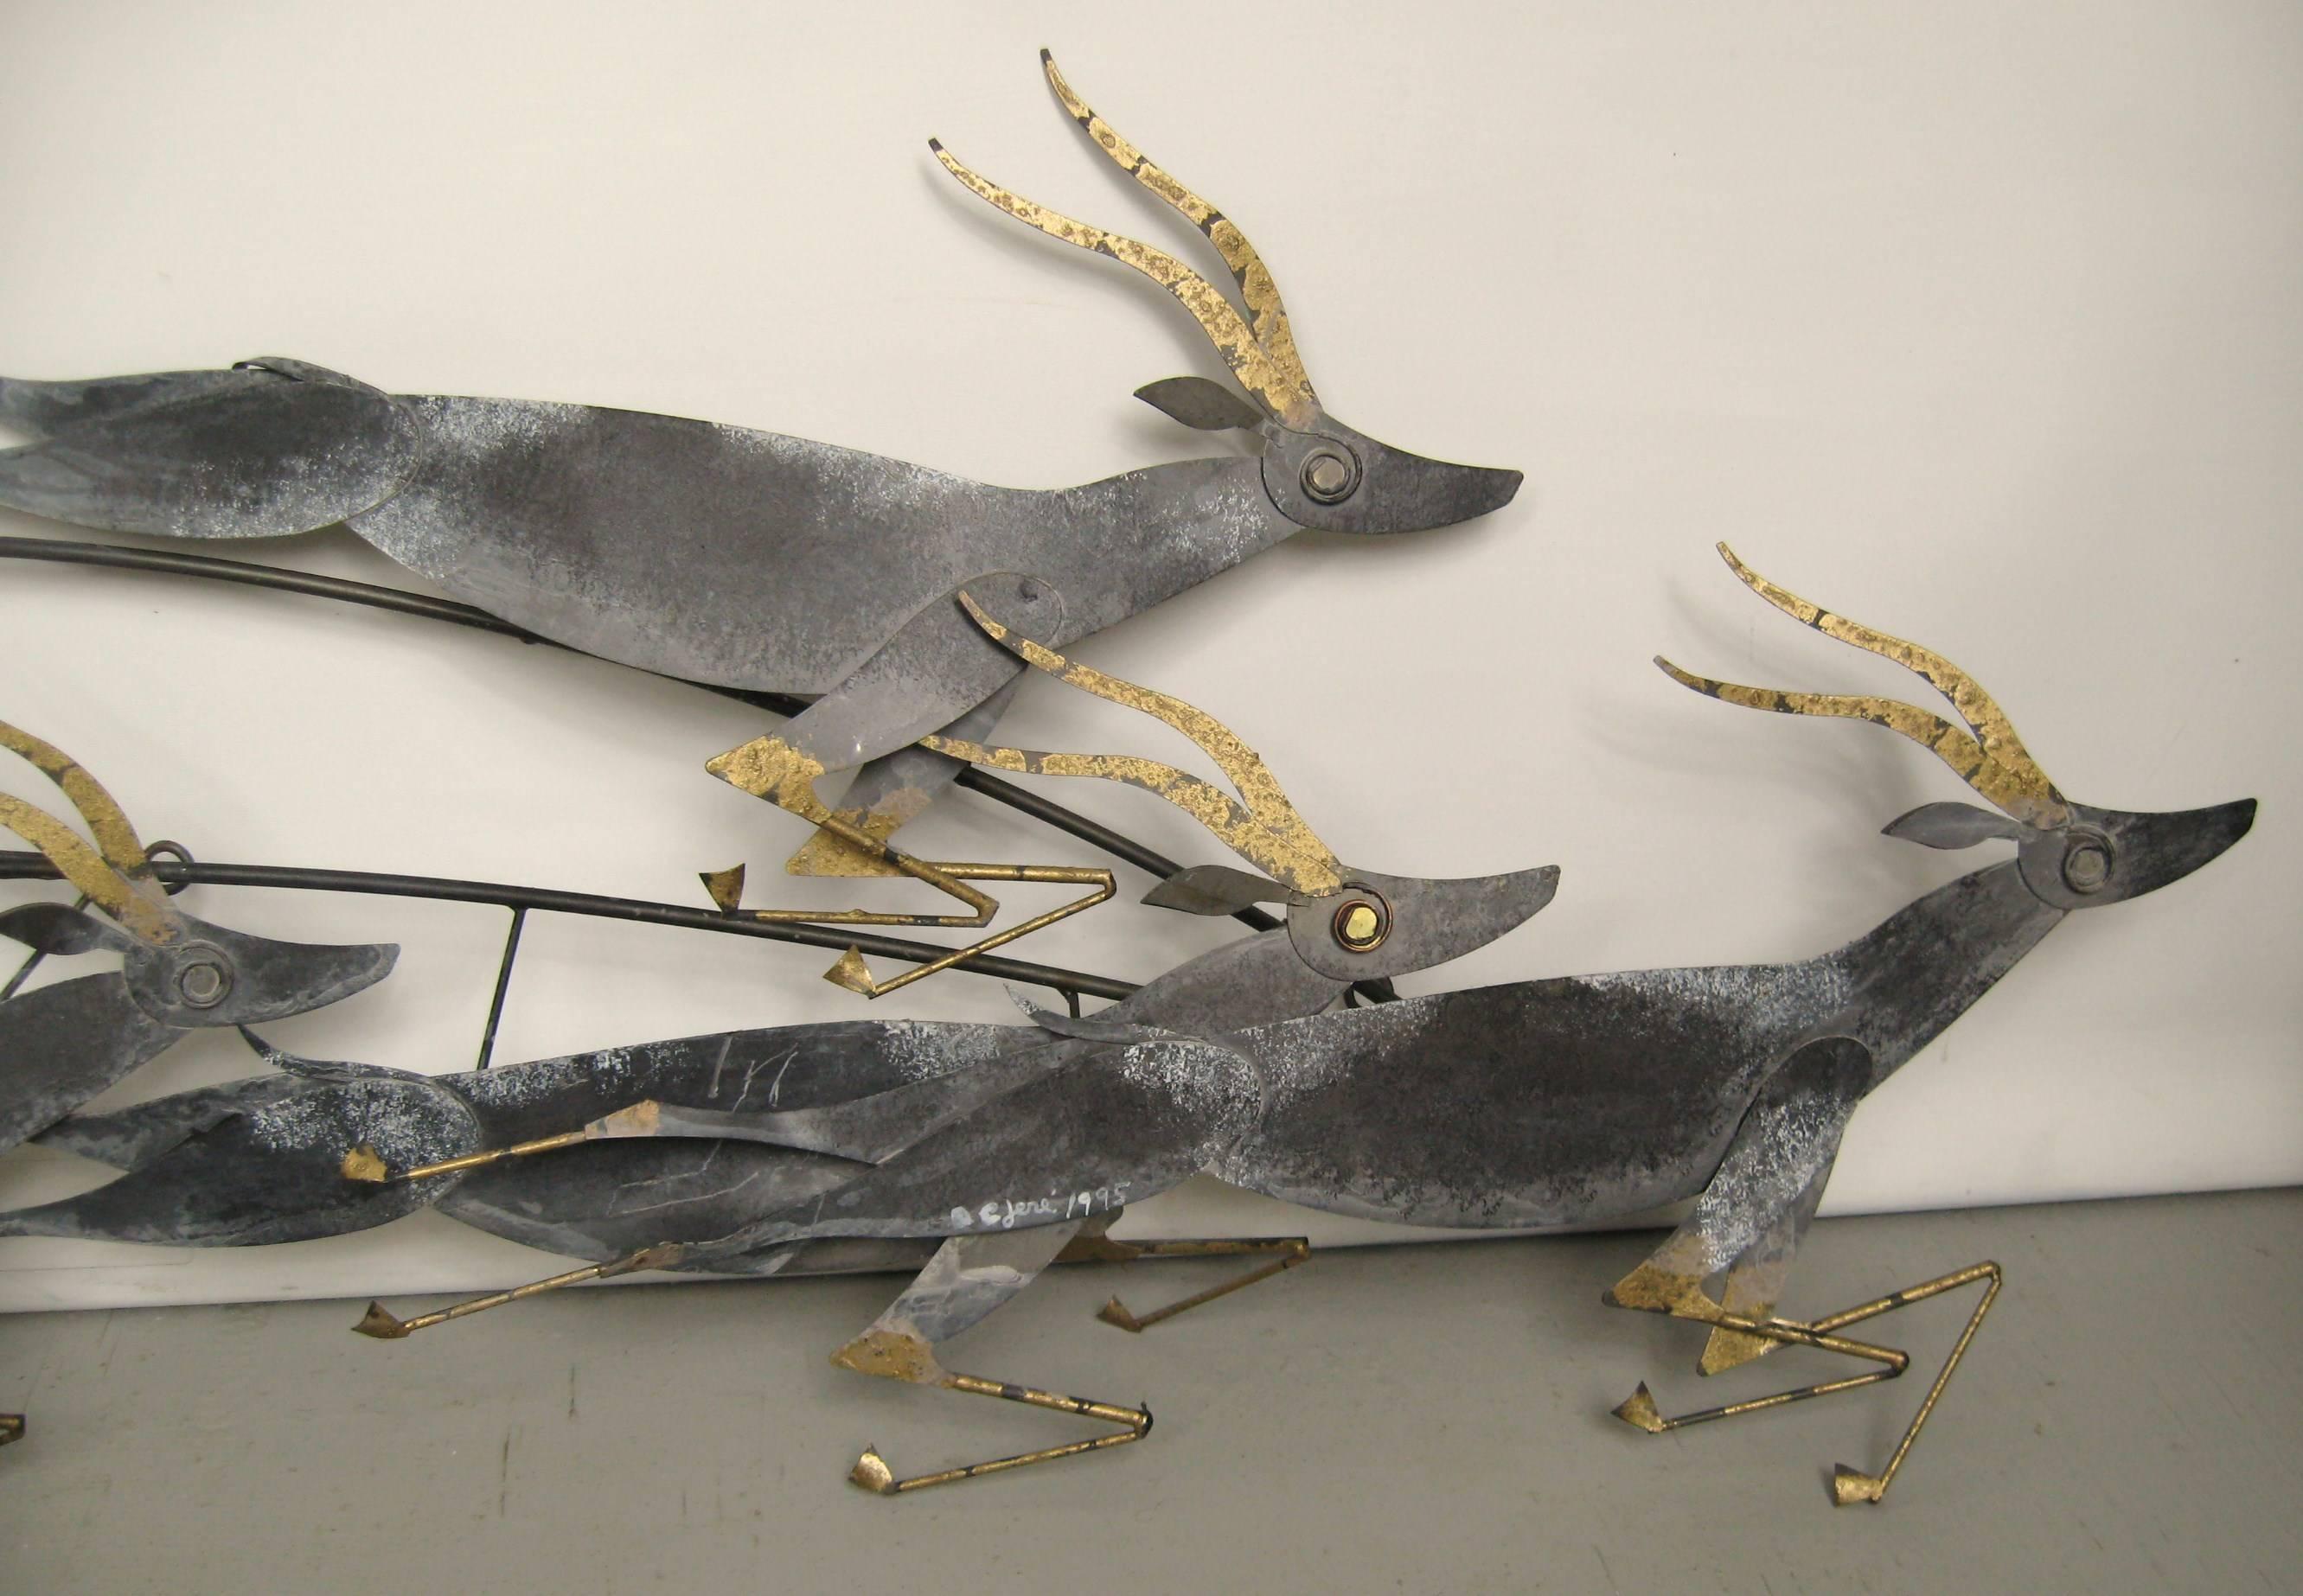 Tin with gold highlights, a wall-mounted sculpture of a herd of running gazelles. Wall sculpture designed by Curtis Jere. Each gazelle is about 24 in.
 